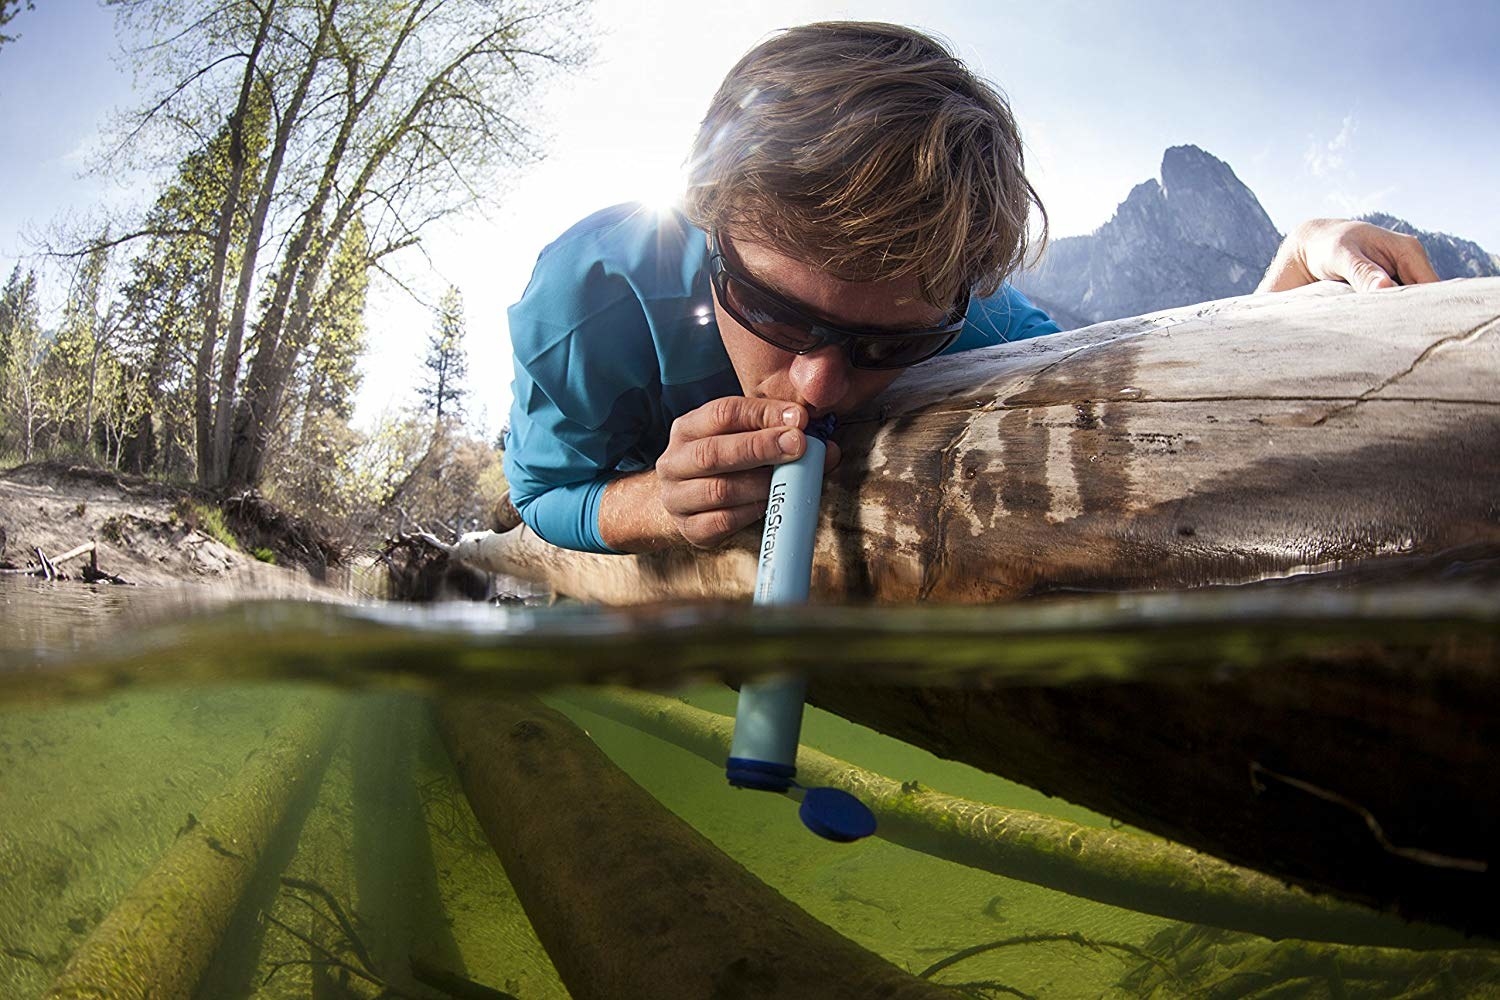 a person using the lifestraw to drink from a pond